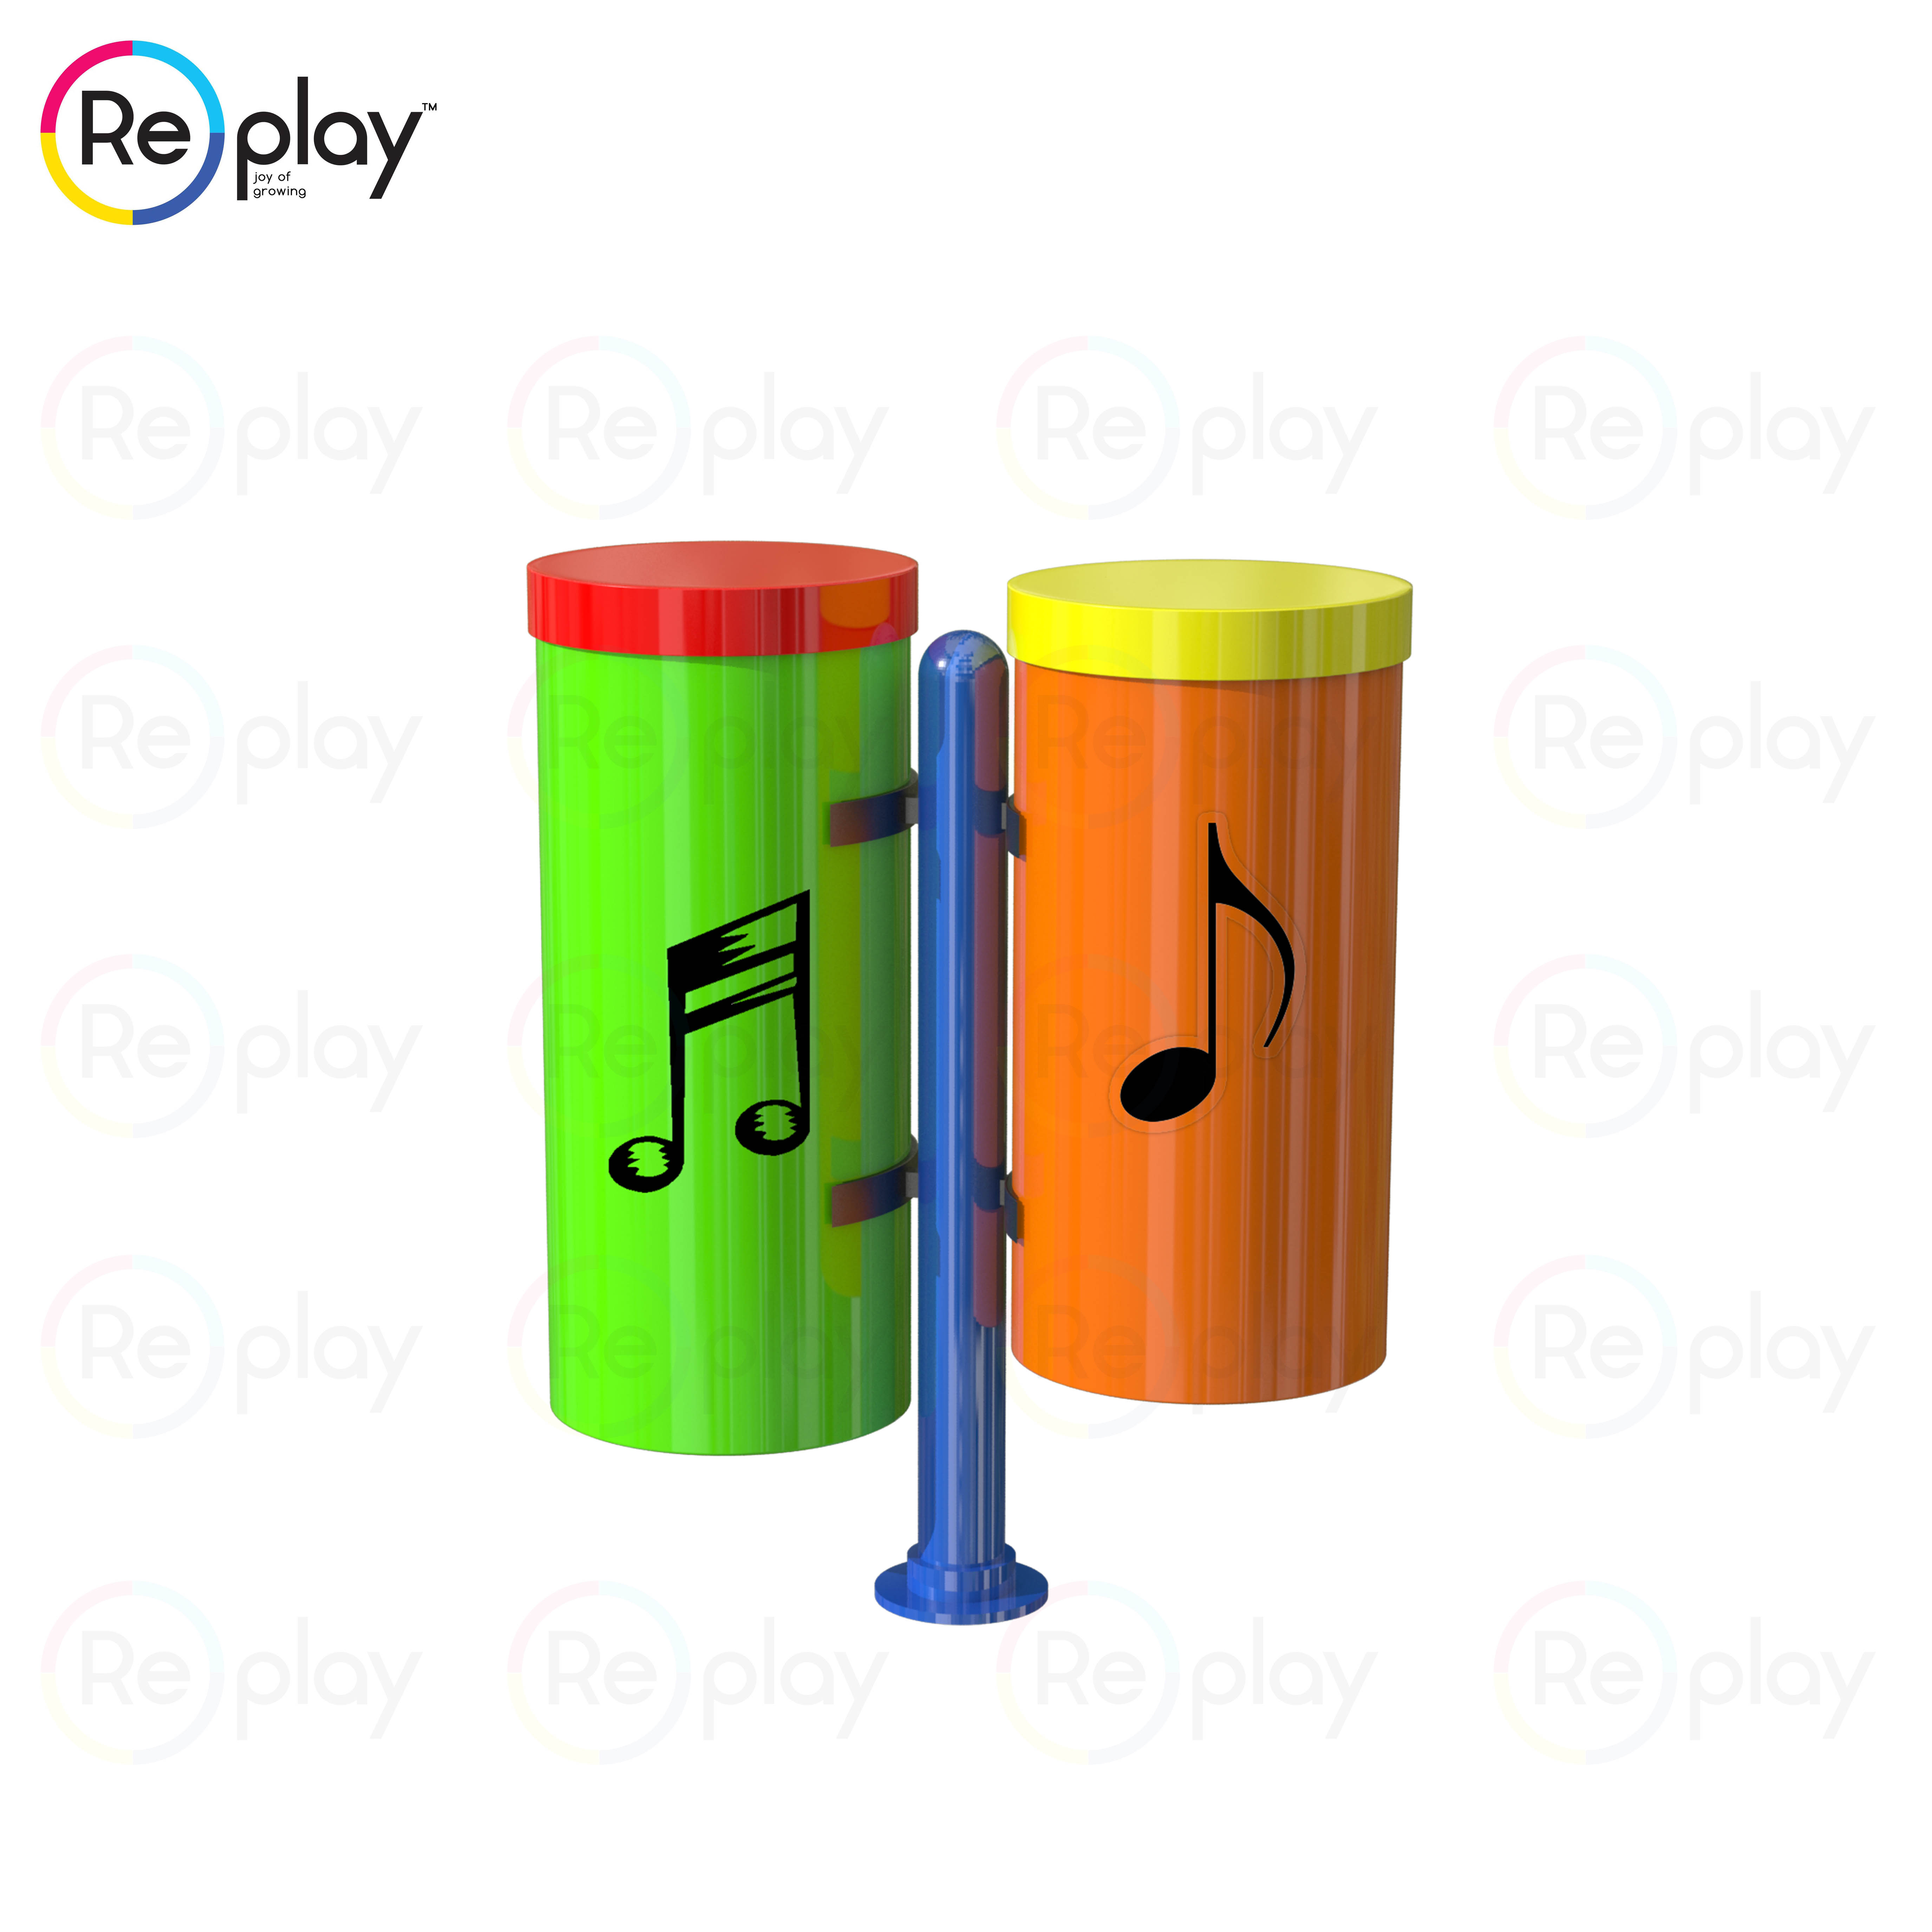 specially abled playground equipment Musical Eqp